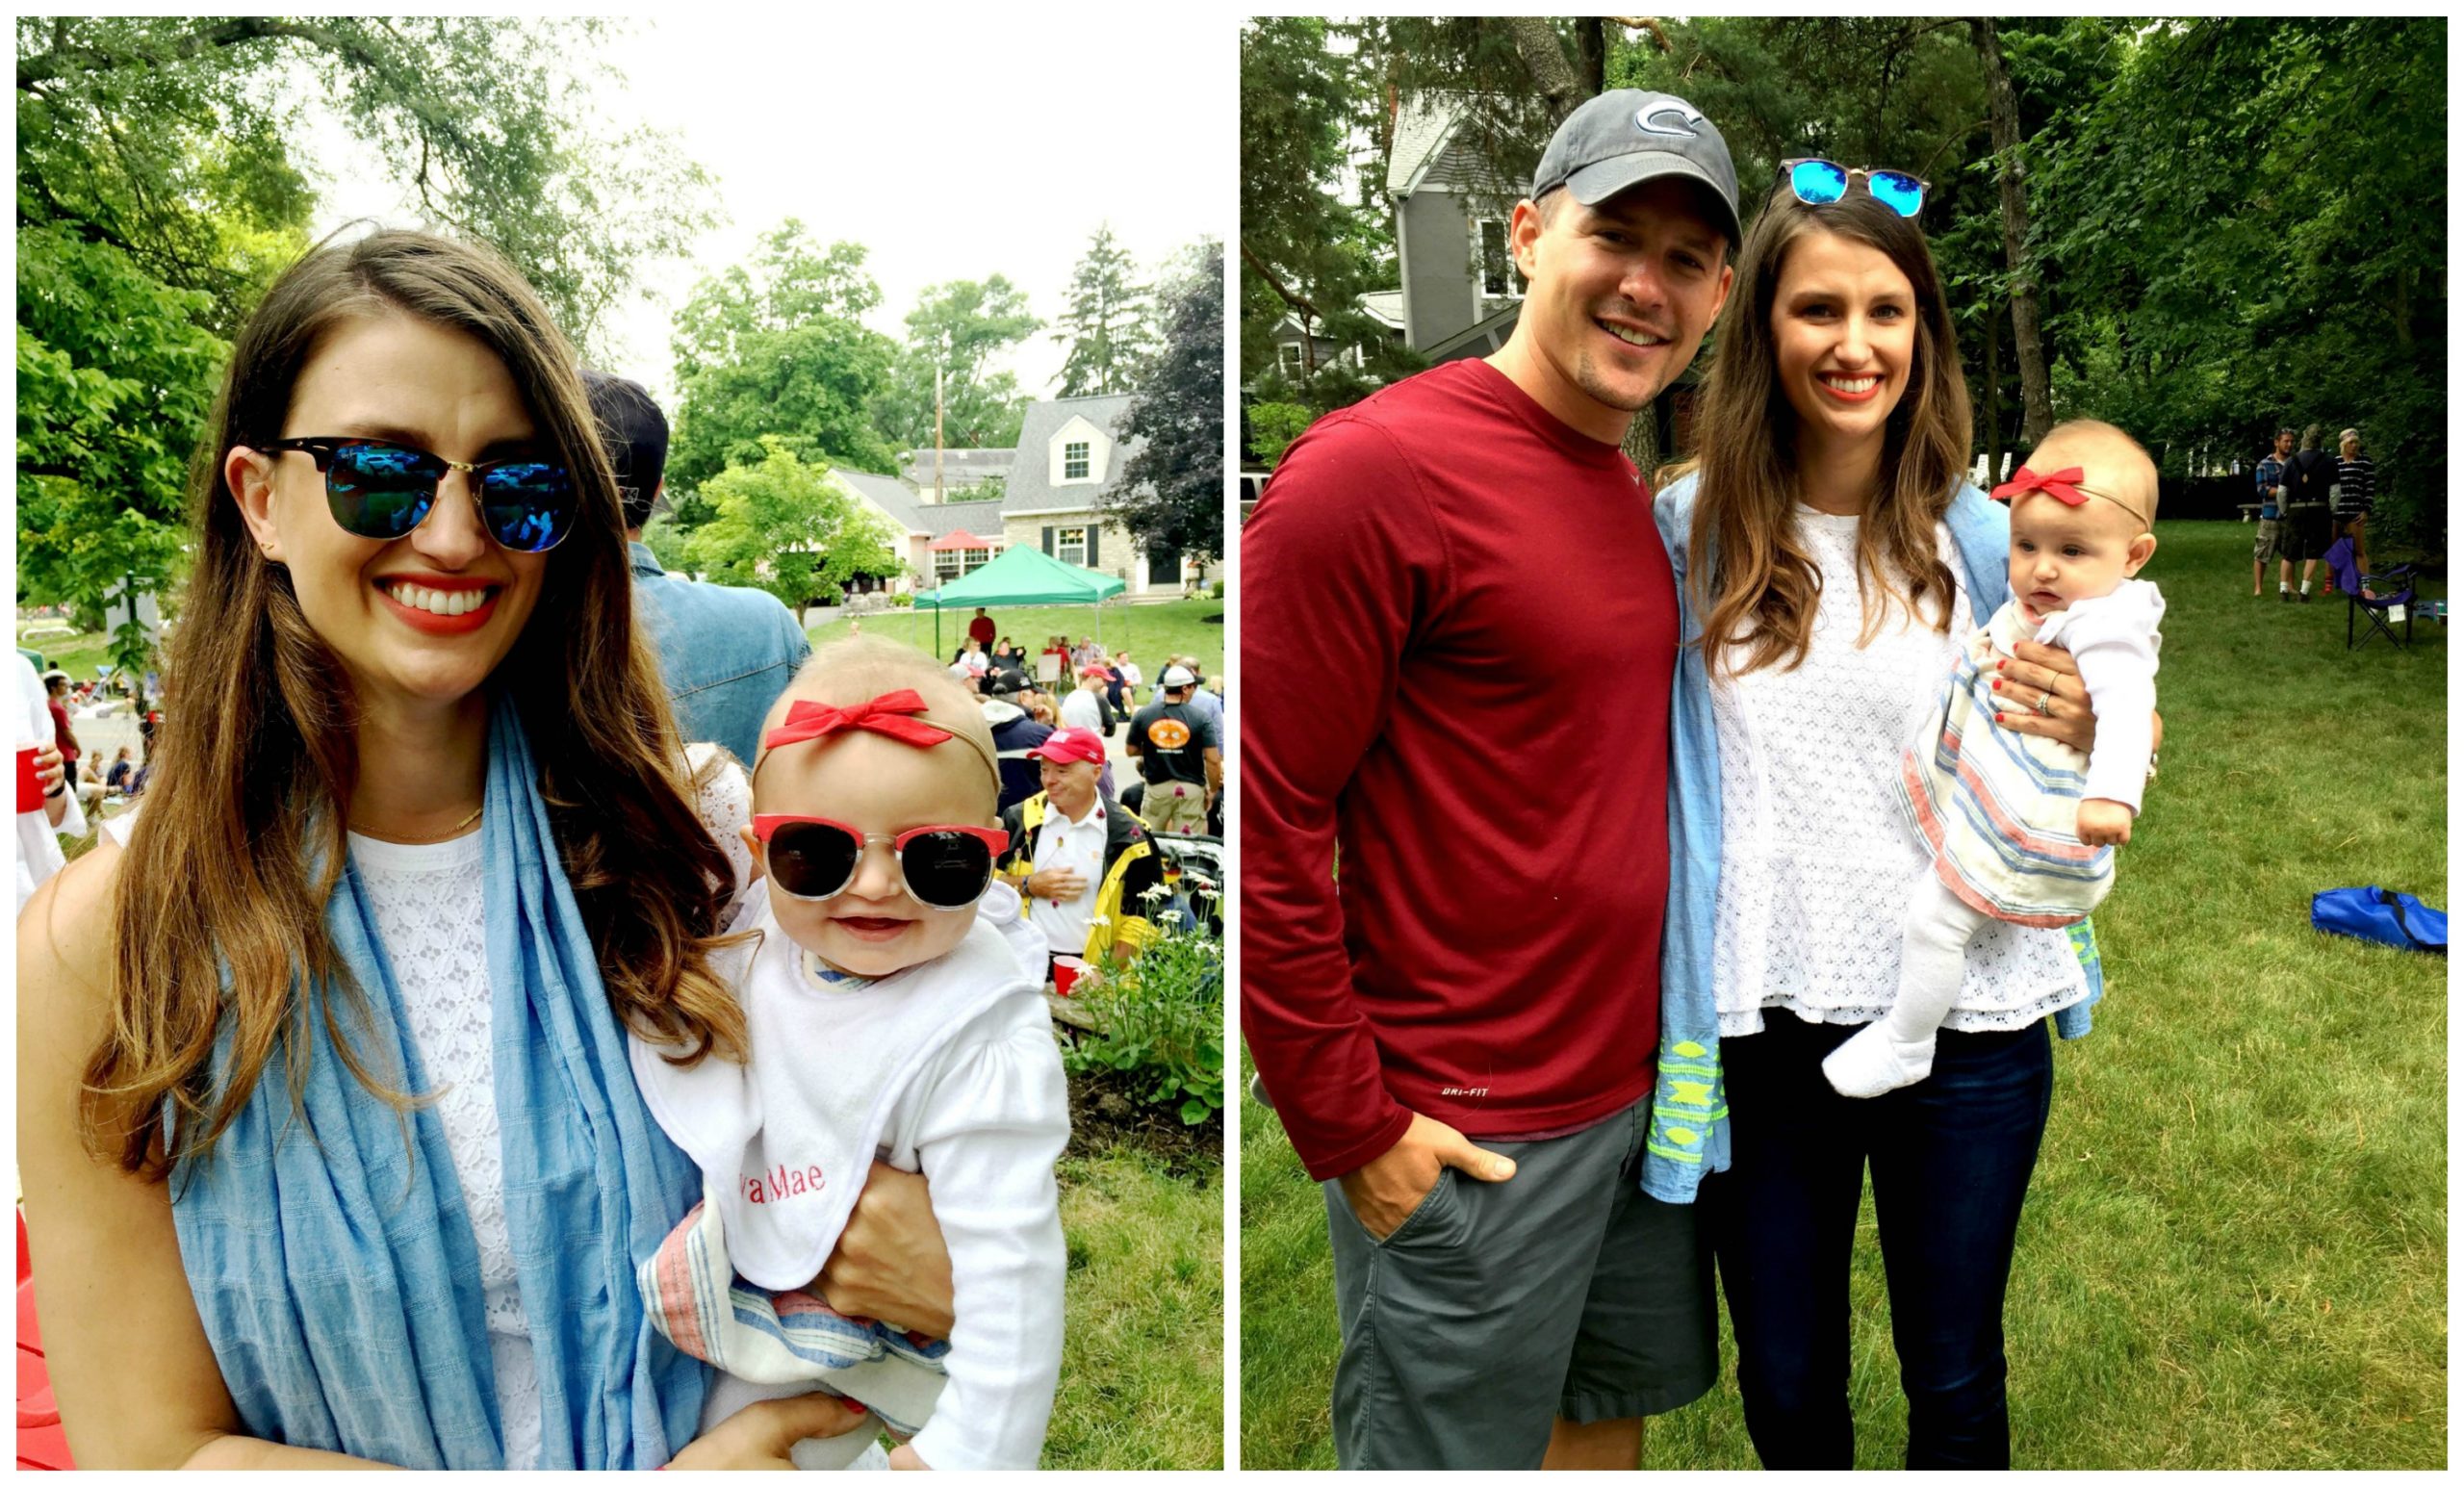 My Weekend in Photos: 4th of July!